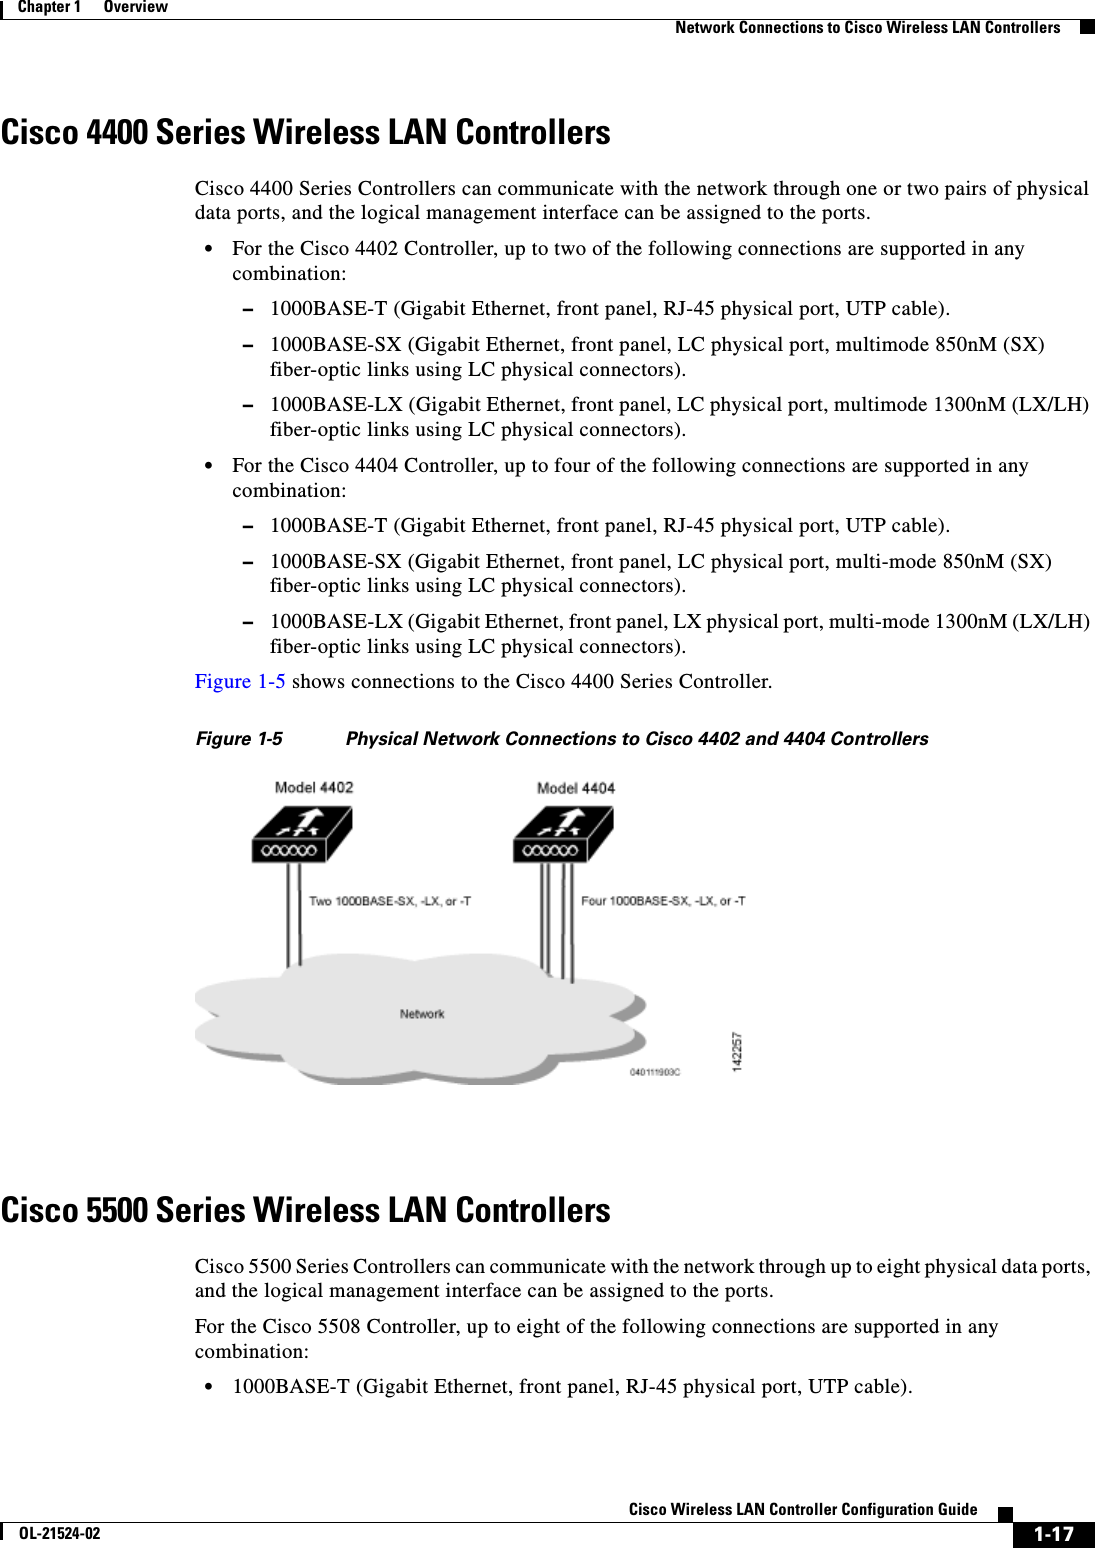  1-17Cisco Wireless LAN Controller Configuration GuideOL-21524-02Chapter 1      OverviewNetwork Connections to Cisco Wireless LAN ControllersCisco 4400 Series Wireless LAN ControllersCisco 4400 Series Controllers can communicate with the network through one or two pairs of physical data ports, and the logical management interface can be assigned to the ports.  • For the Cisco 4402 Controller, up to two of the following connections are supported in any combination:  –1000BASE-T (Gigabit Ethernet, front panel, RJ-45 physical port, UTP cable).  –1000BASE-SX (Gigabit Ethernet, front panel, LC physical port, multimode 850nM (SX) fiber-optic links using LC physical connectors).  –1000BASE-LX (Gigabit Ethernet, front panel, LC physical port, multimode 1300nM (LX/LH) fiber-optic links using LC physical connectors).  • For the Cisco 4404 Controller, up to four of the following connections are supported in any combination:  –1000BASE-T (Gigabit Ethernet, front panel, RJ-45 physical port, UTP cable).  –1000BASE-SX (Gigabit Ethernet, front panel, LC physical port, multi-mode 850nM (SX) fiber-optic links using LC physical connectors).  –1000BASE-LX (Gigabit Ethernet, front panel, LX physical port, multi-mode 1300nM (LX/LH) fiber-optic links using LC physical connectors).Figure 1-5 shows connections to the Cisco 4400 Series Controller.Figure 1-5 Physical Network Connections to Cisco 4402 and 4404 ControllersCisco 5500 Series Wireless LAN ControllersCisco 5500 Series Controllers can communicate with the network through up to eight physical data ports, and the logical management interface can be assigned to the ports.For the Cisco 5508 Controller, up to eight of the following connections are supported in any combination:  • 1000BASE-T (Gigabit Ethernet, front panel, RJ-45 physical port, UTP cable).